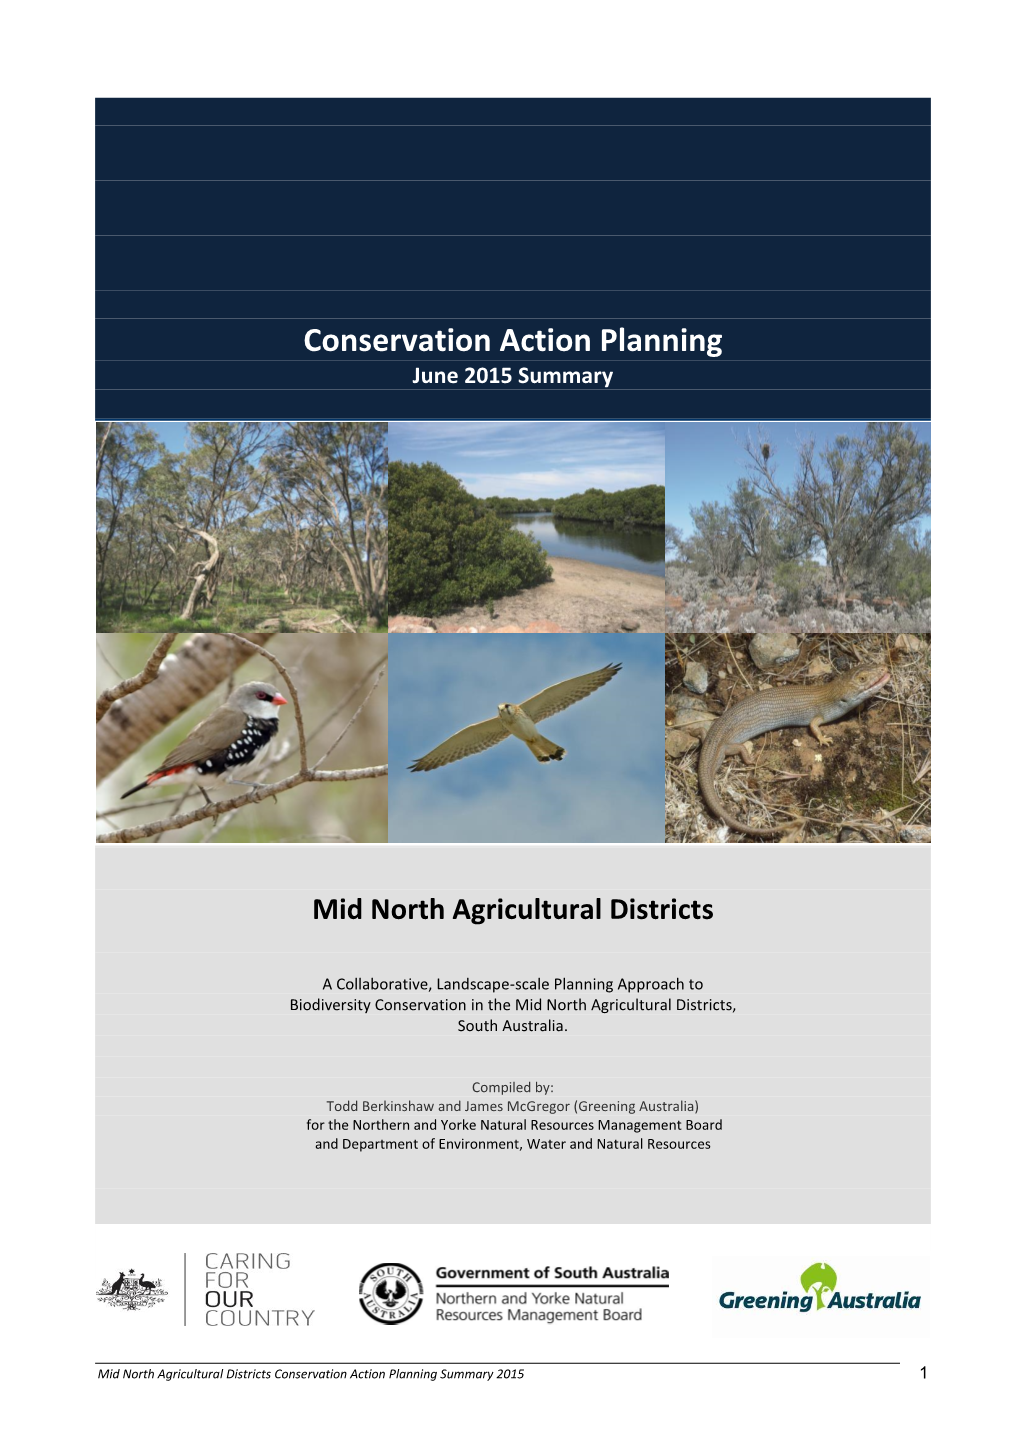 Conservation Action Planning June 2015 Summary